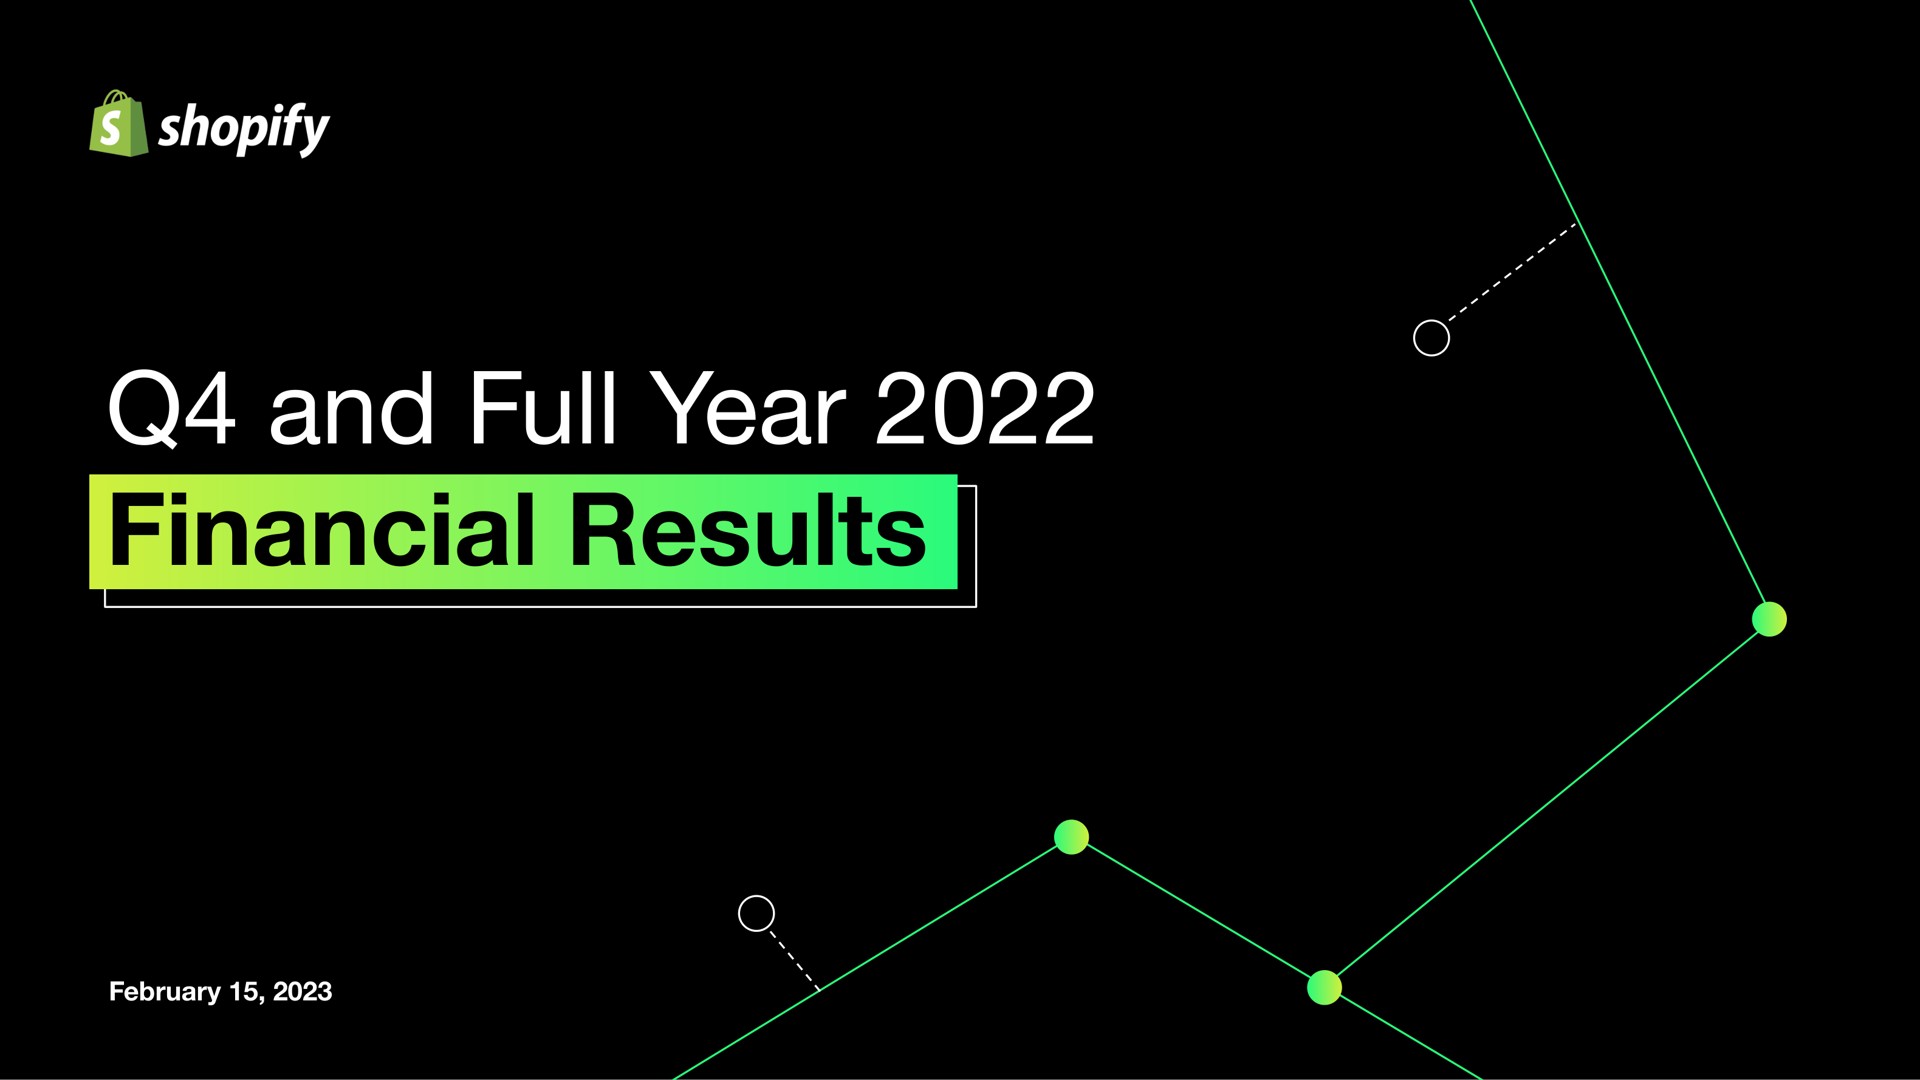 and full year financial results rea | Shopify